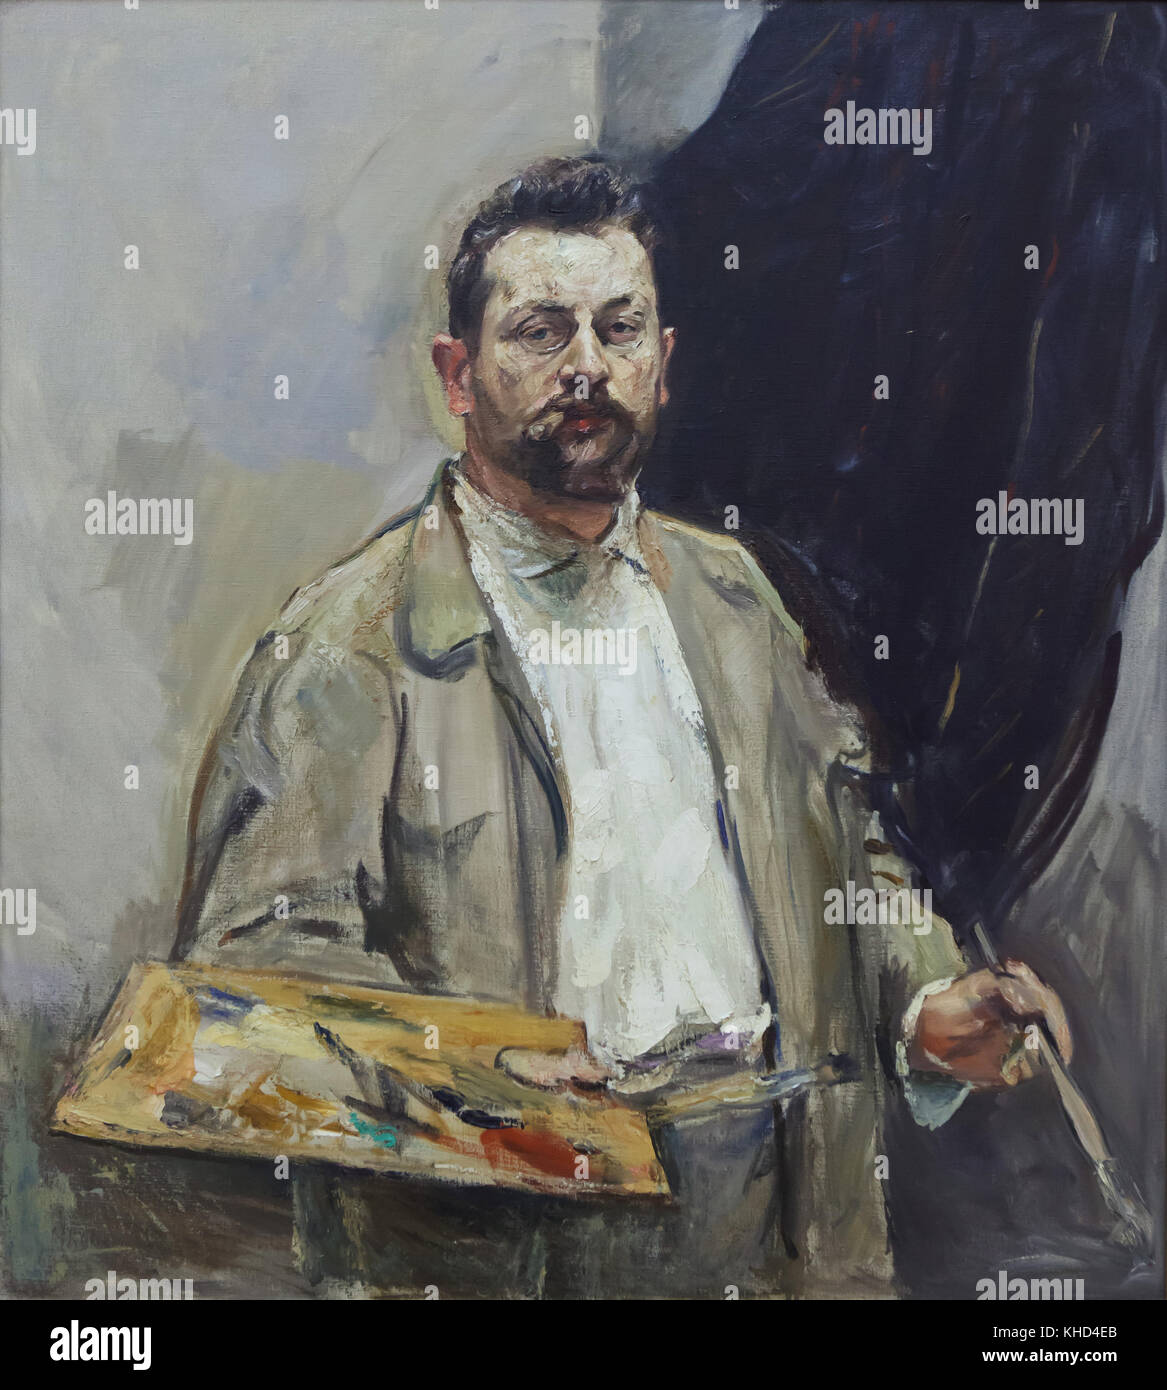 German Impressionist painter Max Slevogt. Detail of the painting 'Self-portrait with the Palette' (1906) by German Impressionist painter Max Slevogt on display in the Museum der bildenden Künste (Museum of Fine Arts) in Leipzig, Saxony, Germany. Stock Photo